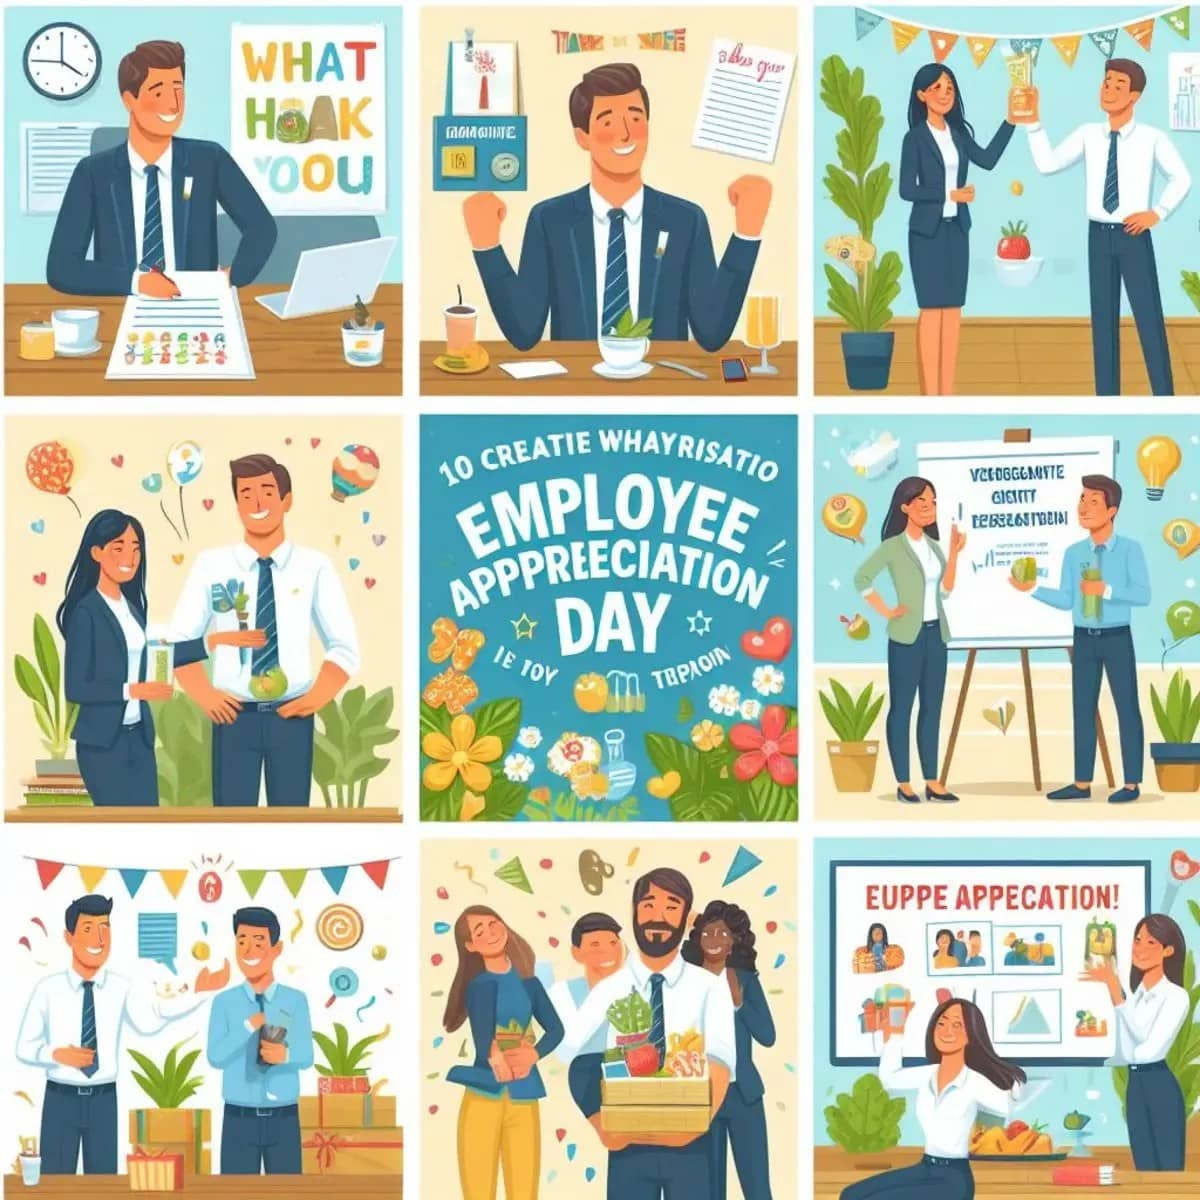 10-Creative-Ways-to-Celebrate-Employee-Appreciation-Day-and-Boost-Workplace-Morale